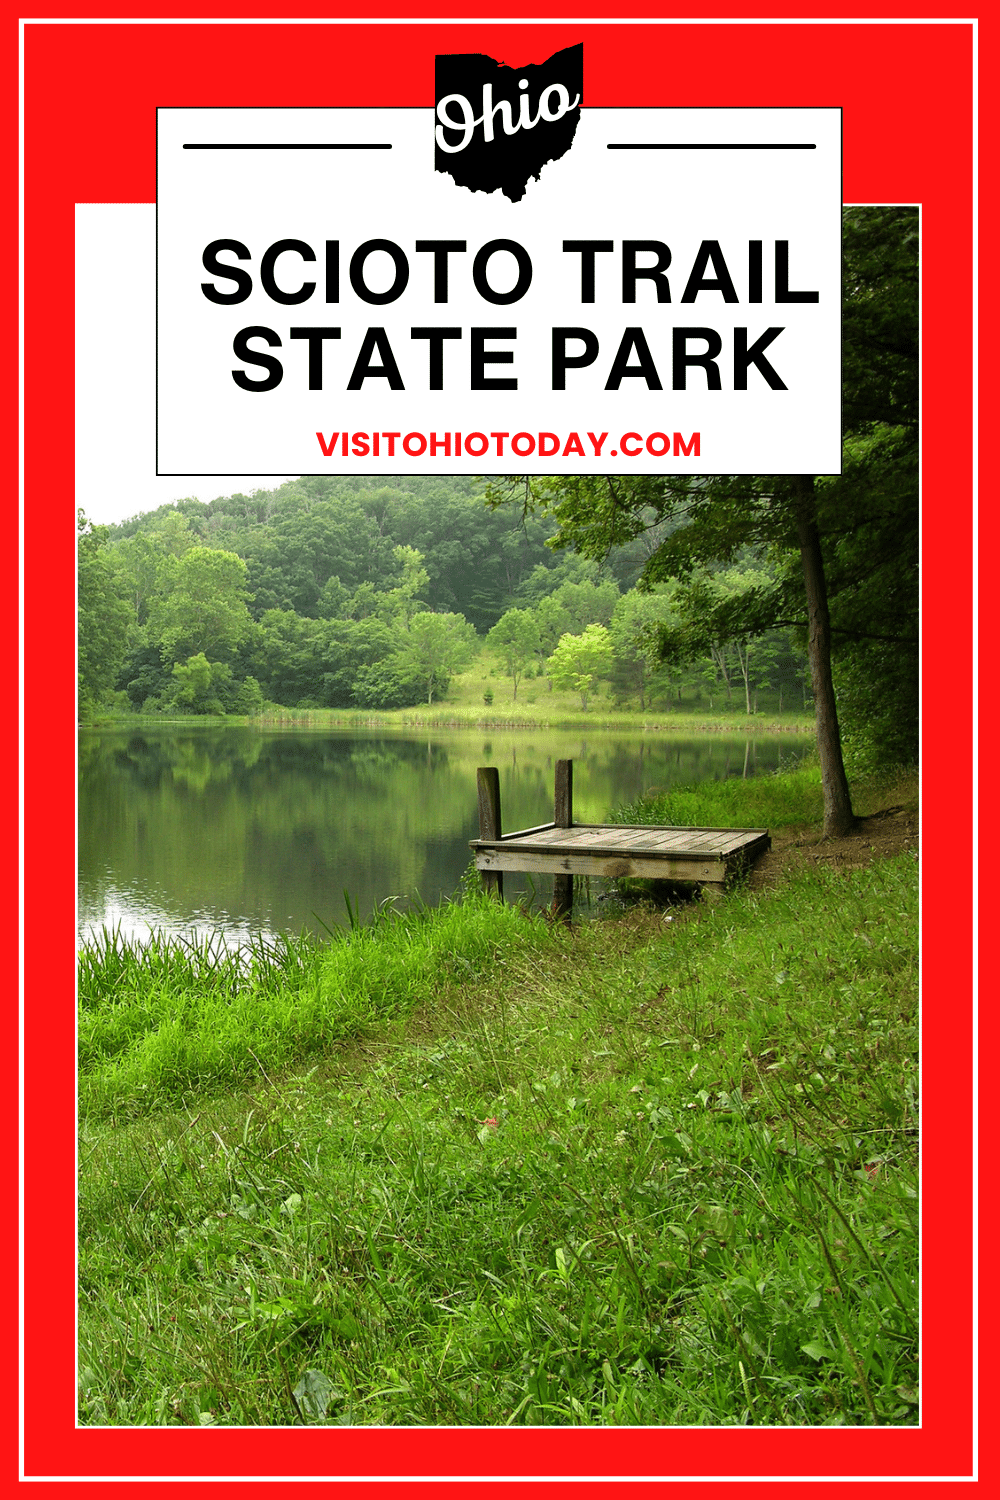 Scioto Trail State Park is in Ross County, Ohio, within the stunning 9,000-acre Scioto Trail State Forest.  It is just south of Chillicothe, where the ridgetops and winding roads offer breathtaking views of southern Ohio’s Scioto River Valley.